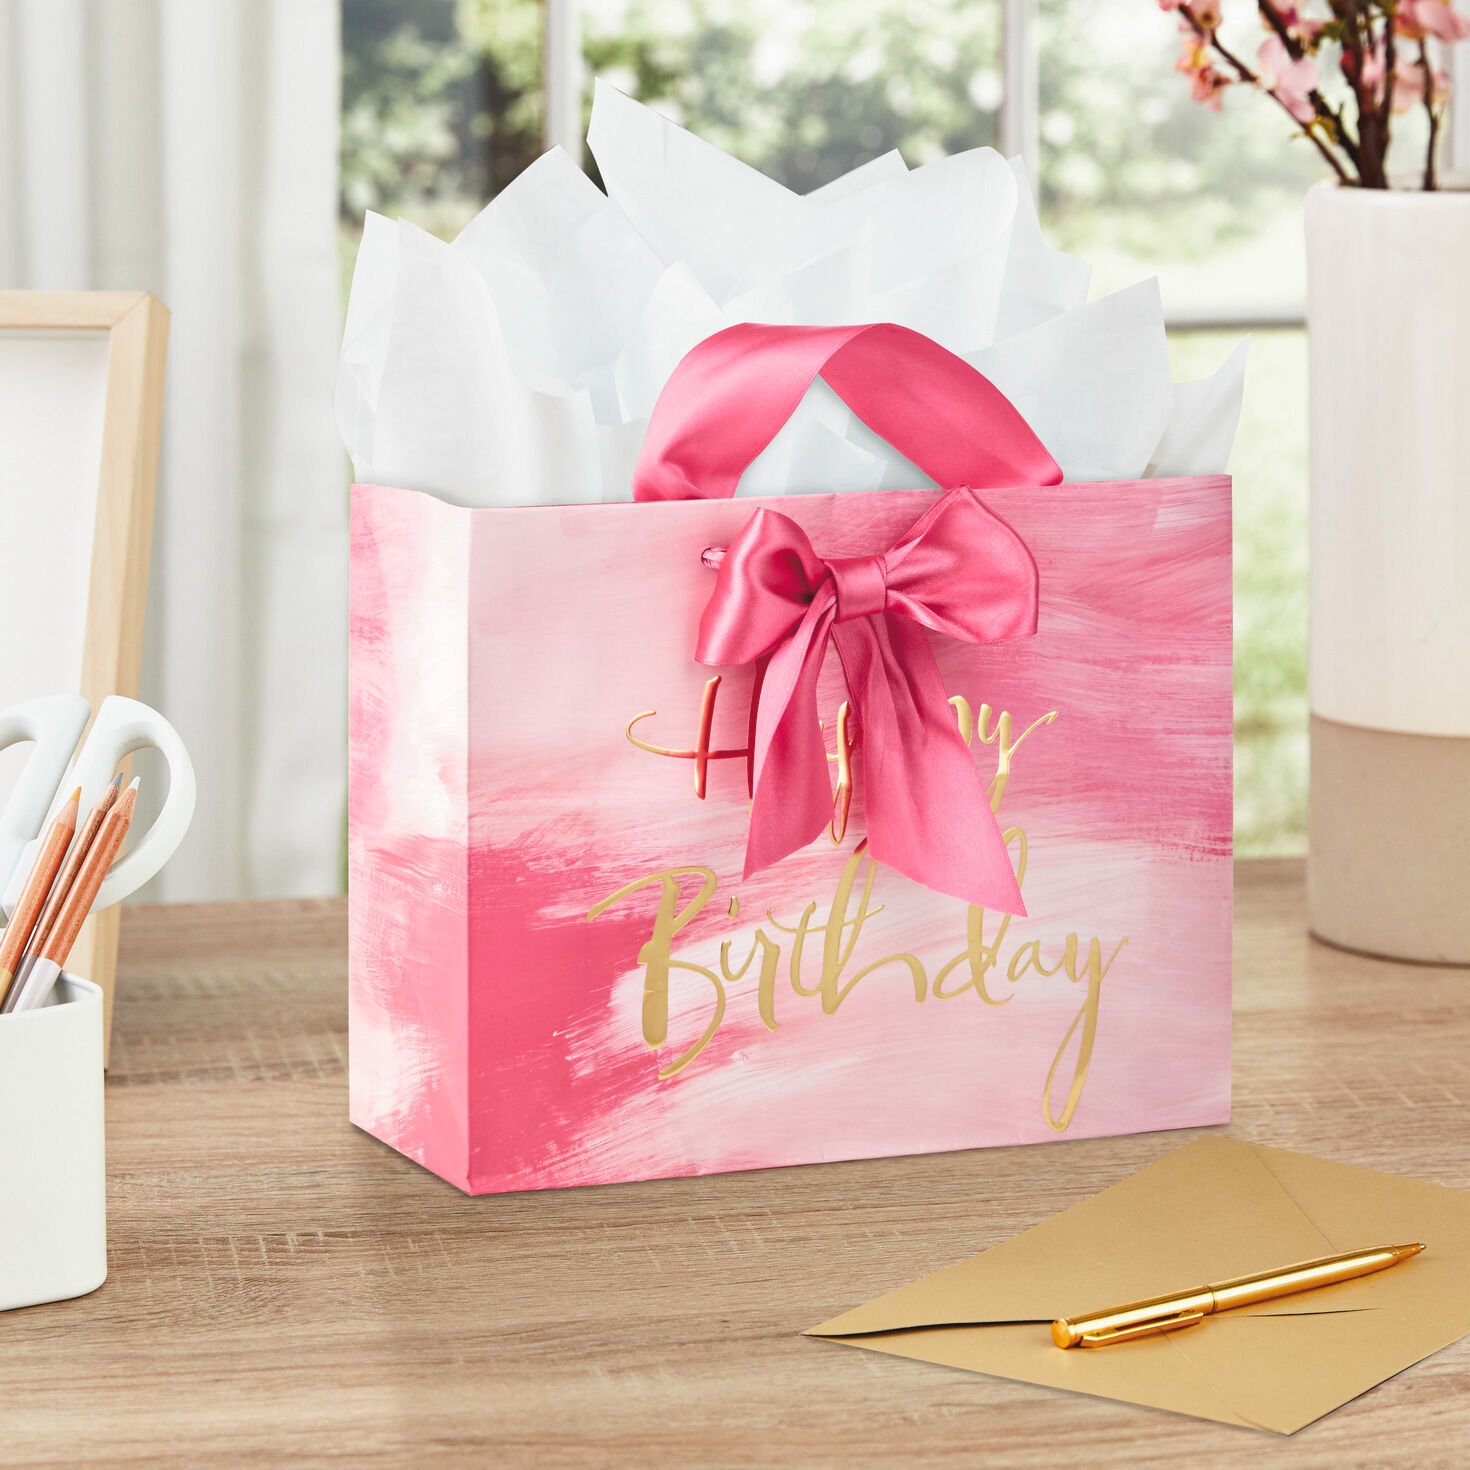 MEDIUM Color Kraft Paper Bags Gift Bags Solid Matte Colors Party Candy Bags 